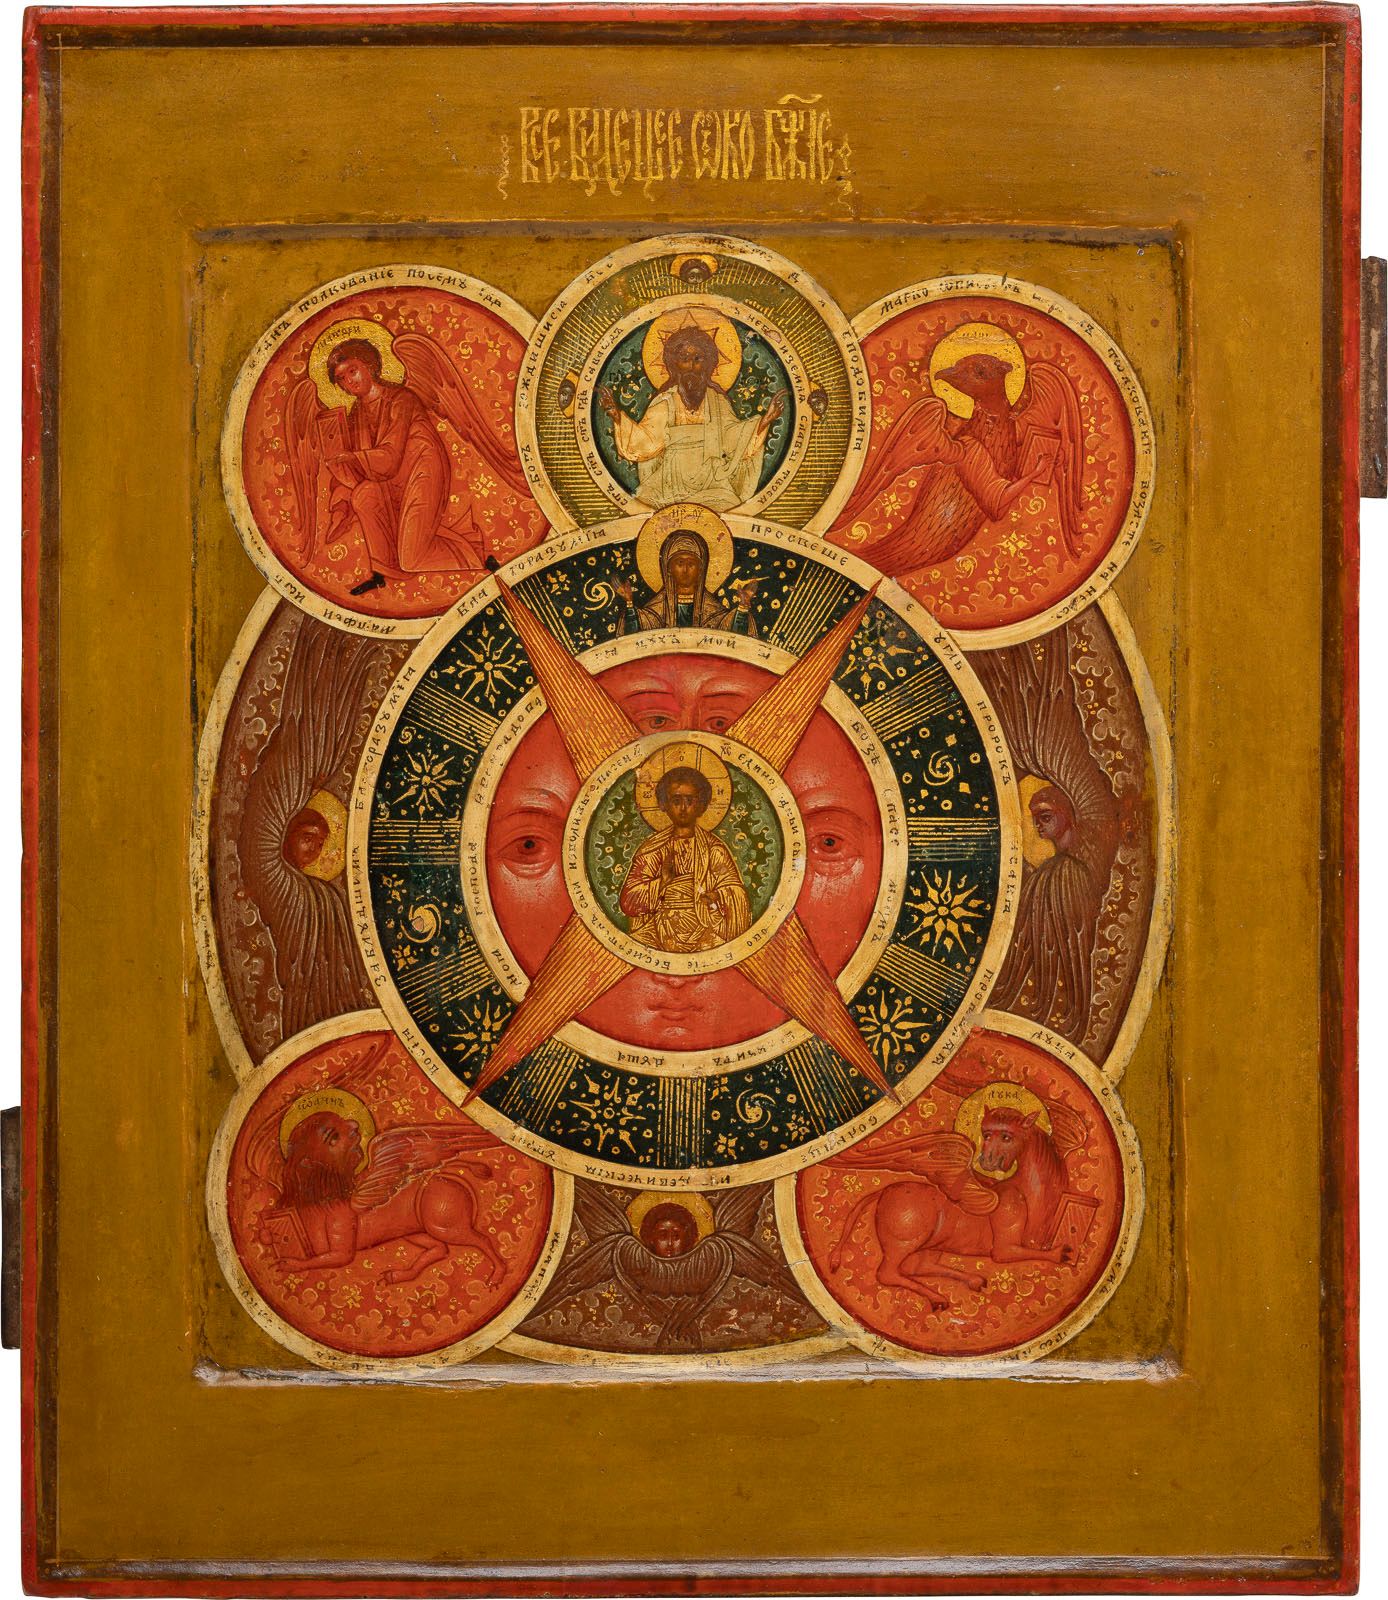 A FINE ICON SHOWING THE 'ALL-SEEING EYE OF GOD' 显示 "上帝之眼 "的精美图标 俄国中部，约1900年 木板上的&hellip;